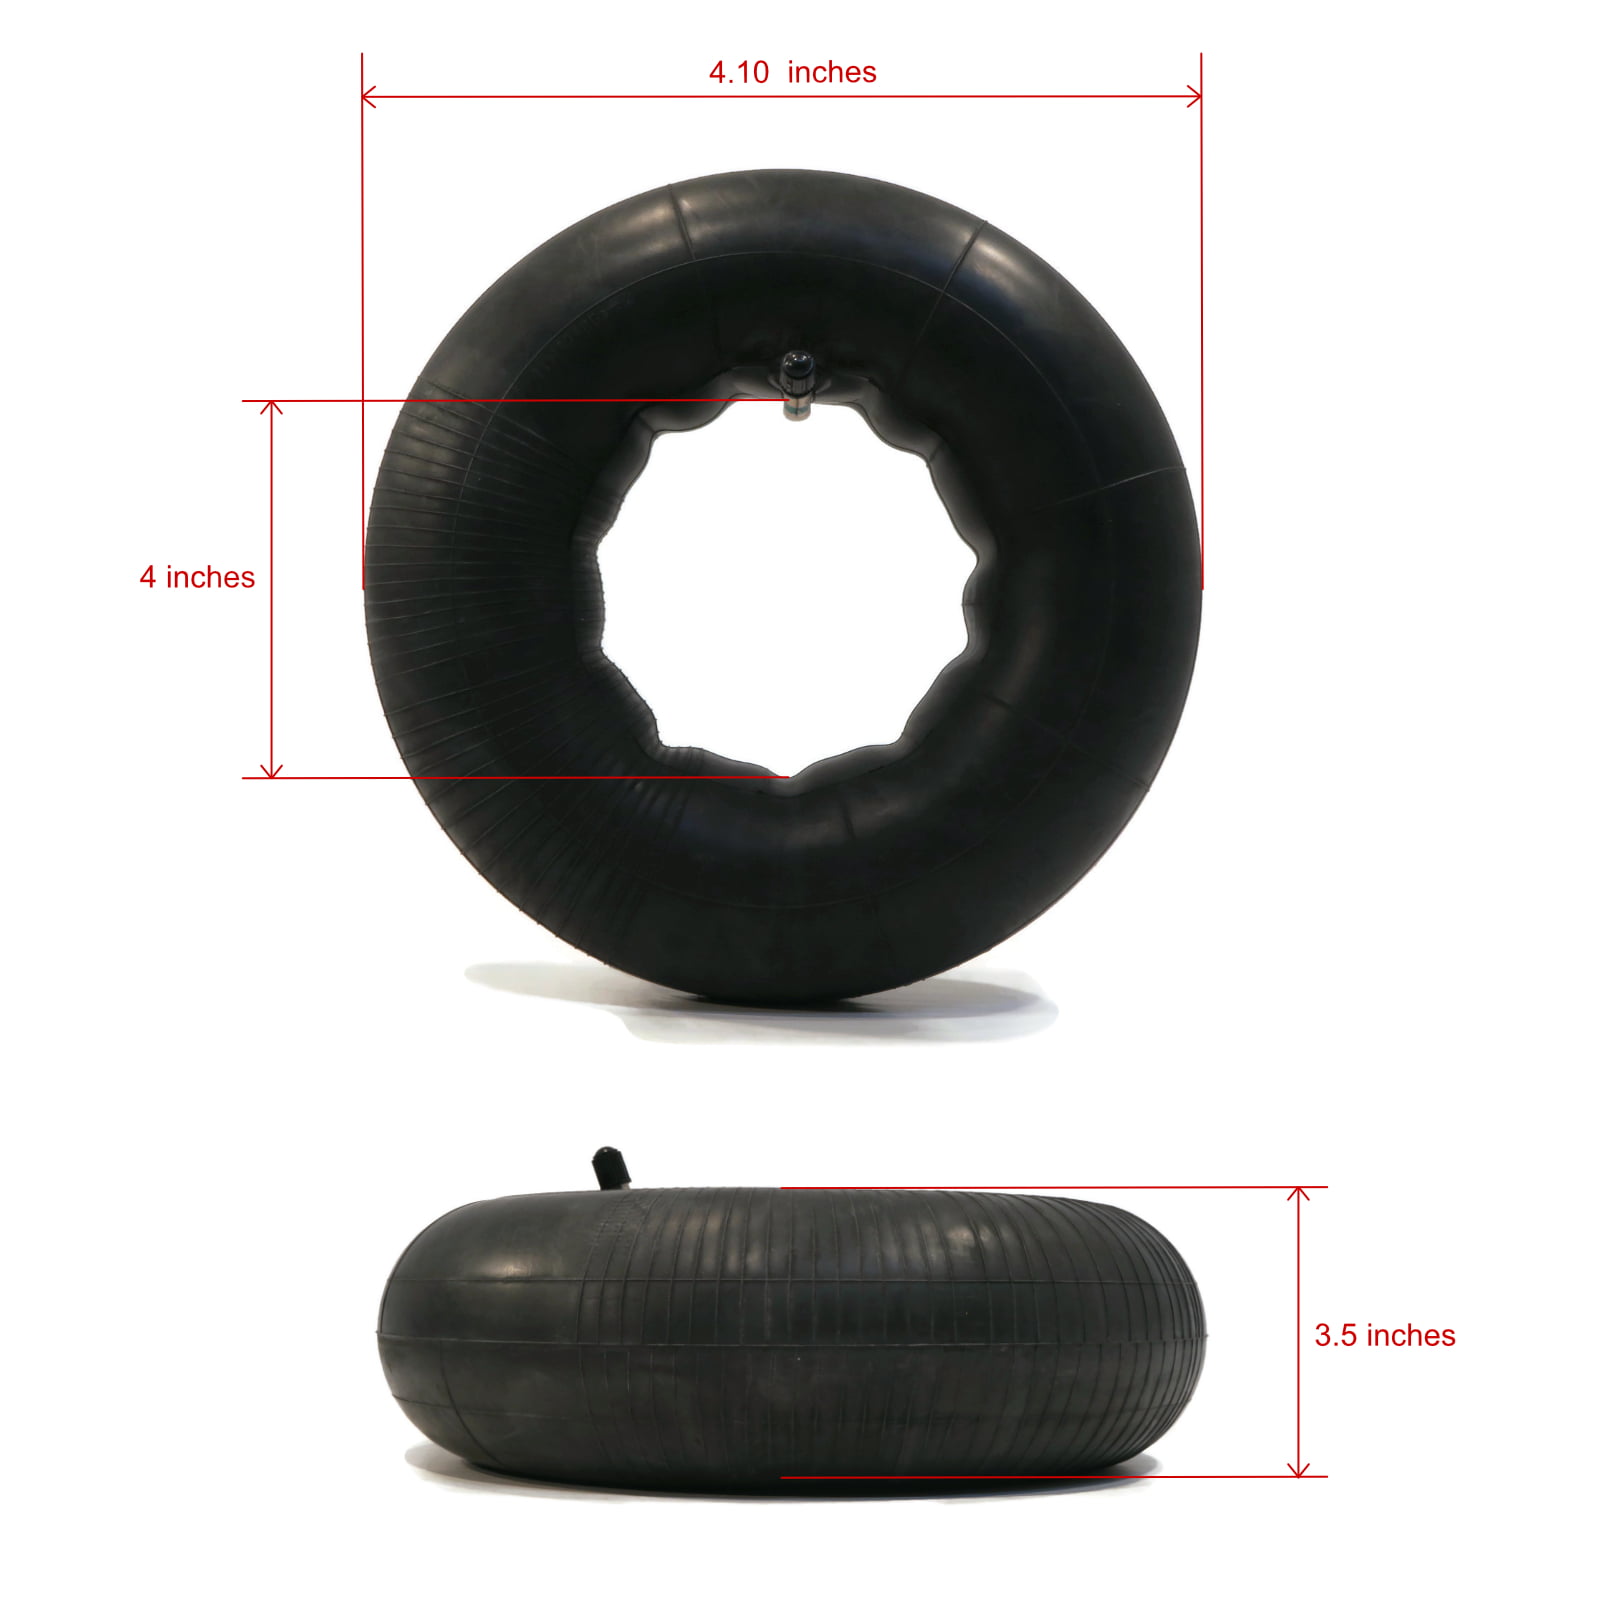 2 New TIRE INNER TUBES 3.50x4 TR13 Straight replace Rotary 9620 Stens 170-138 